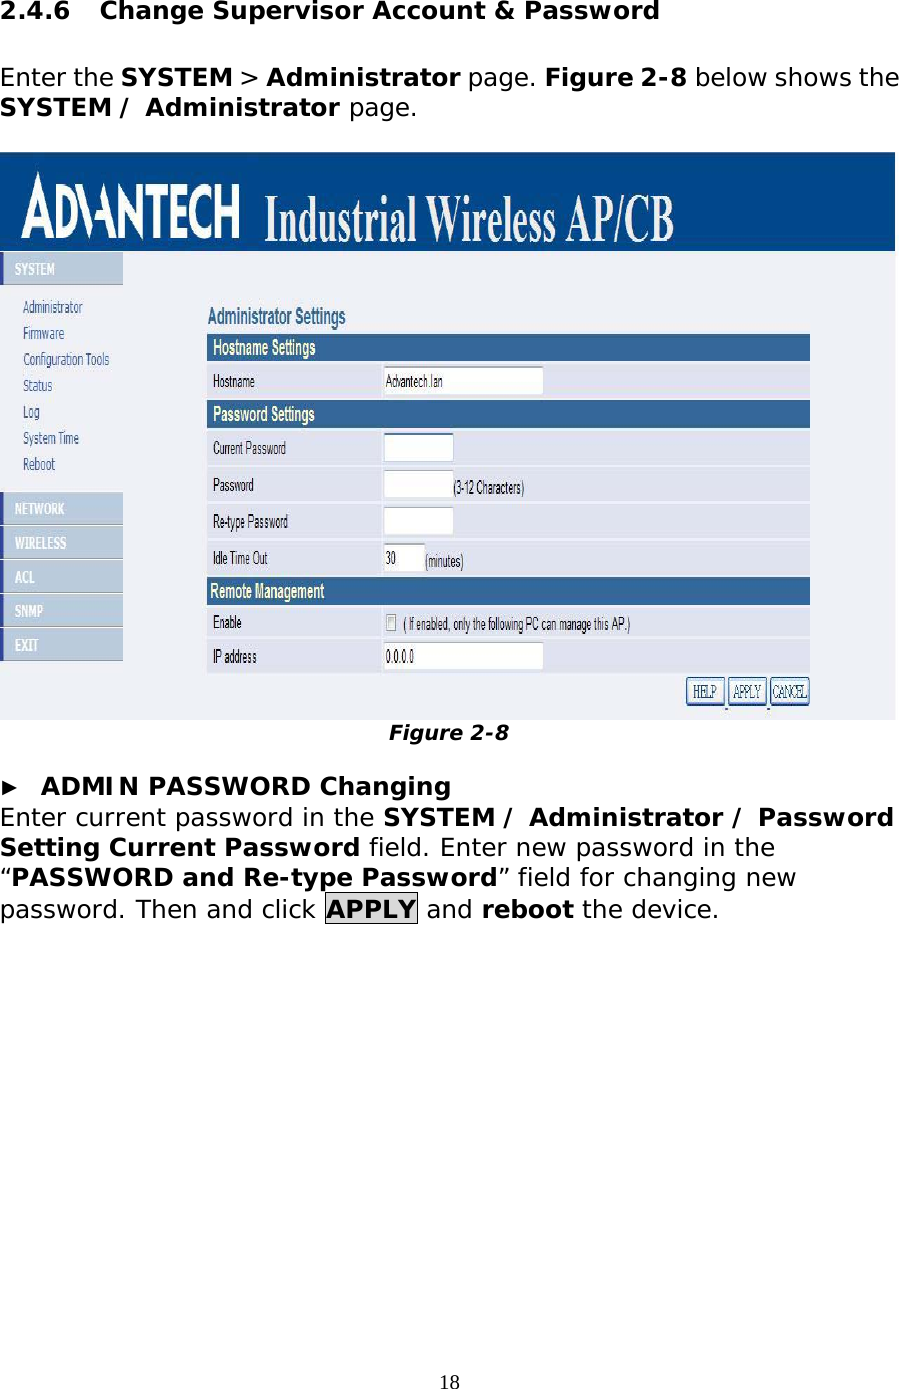                   2.4.6  Change Supervisor Account &amp; Password  Enter the SYSTEM &gt; Administrator page. Figure 2-8 below shows the SYSTEM / Administrator page.   Figure 2-8  ►  ADMIN PASSWORD Changing Enter current password in the SYSTEM / Administrator / Password Setting Current Password field. Enter new password in the “PASSWORD and Re-type Password” field for changing new password. Then and click APPLY and reboot the device.   18 